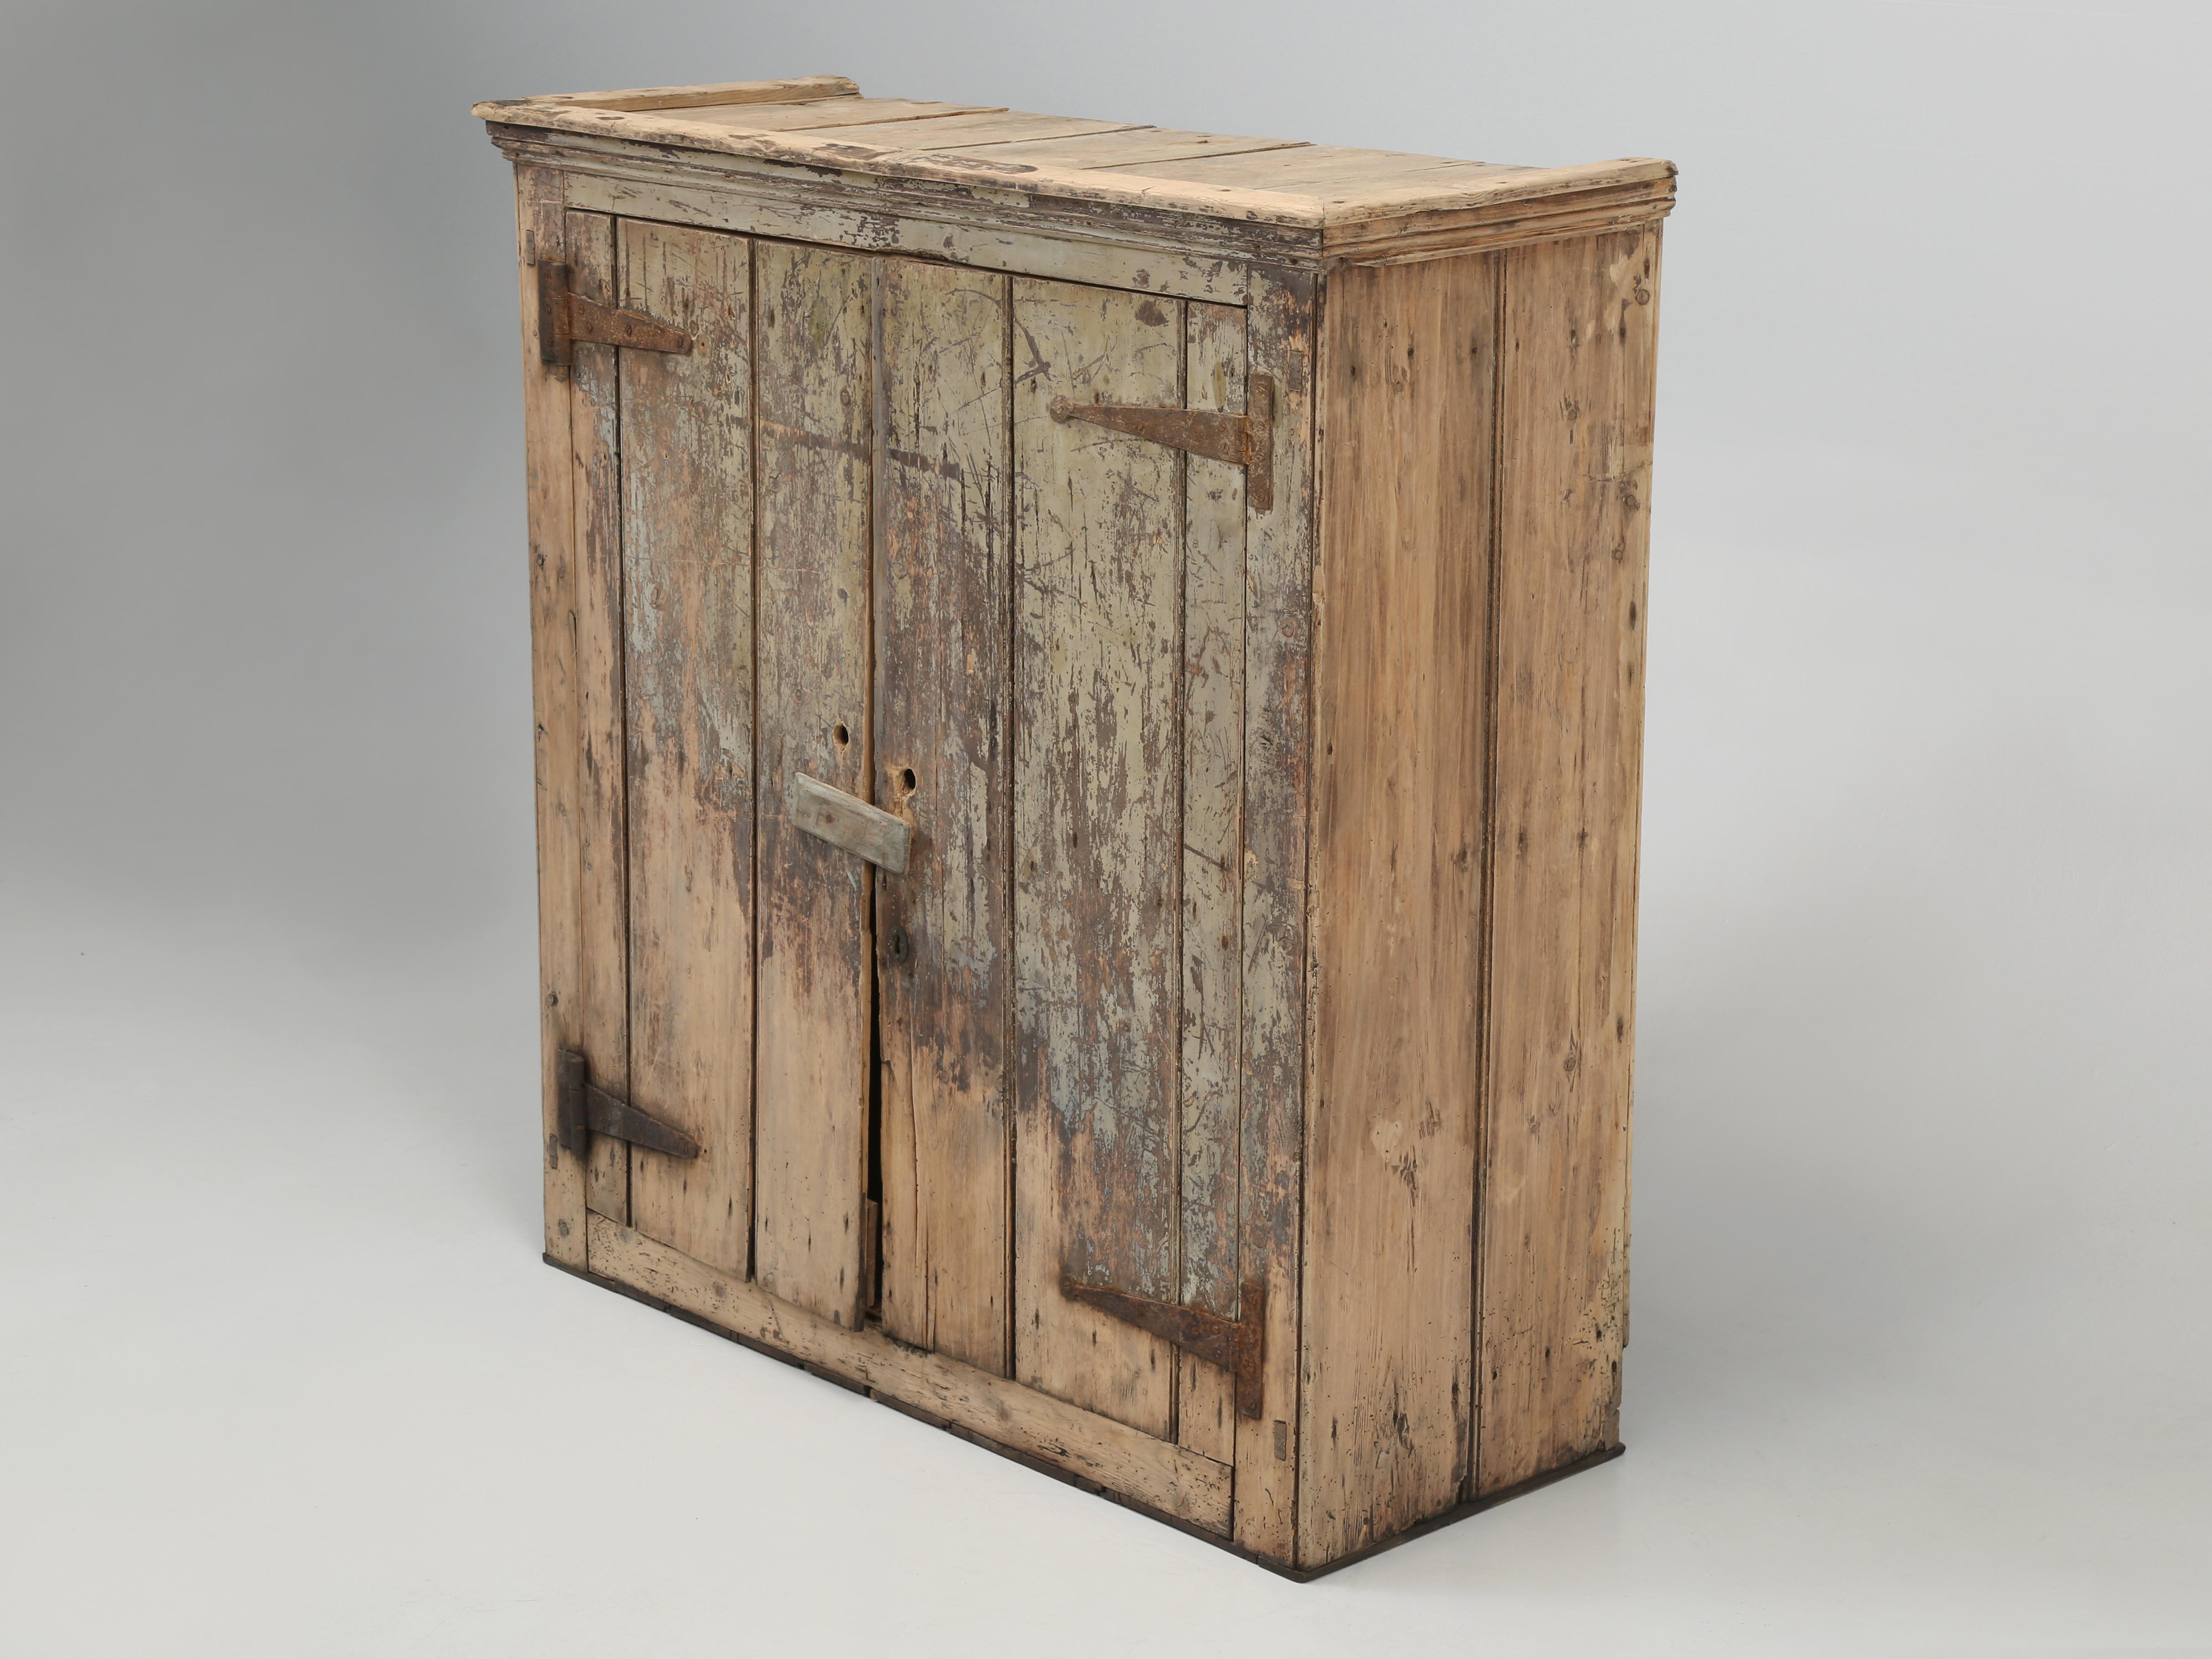 Wonderful “Shabby Chic” rustic antique 2-door small cupboard, still wearing its Original Painted Finish from the 1800s. The Small Painted Cupboard was found in Ireland and after some cleaning and tightening she’s ready for a new home. The